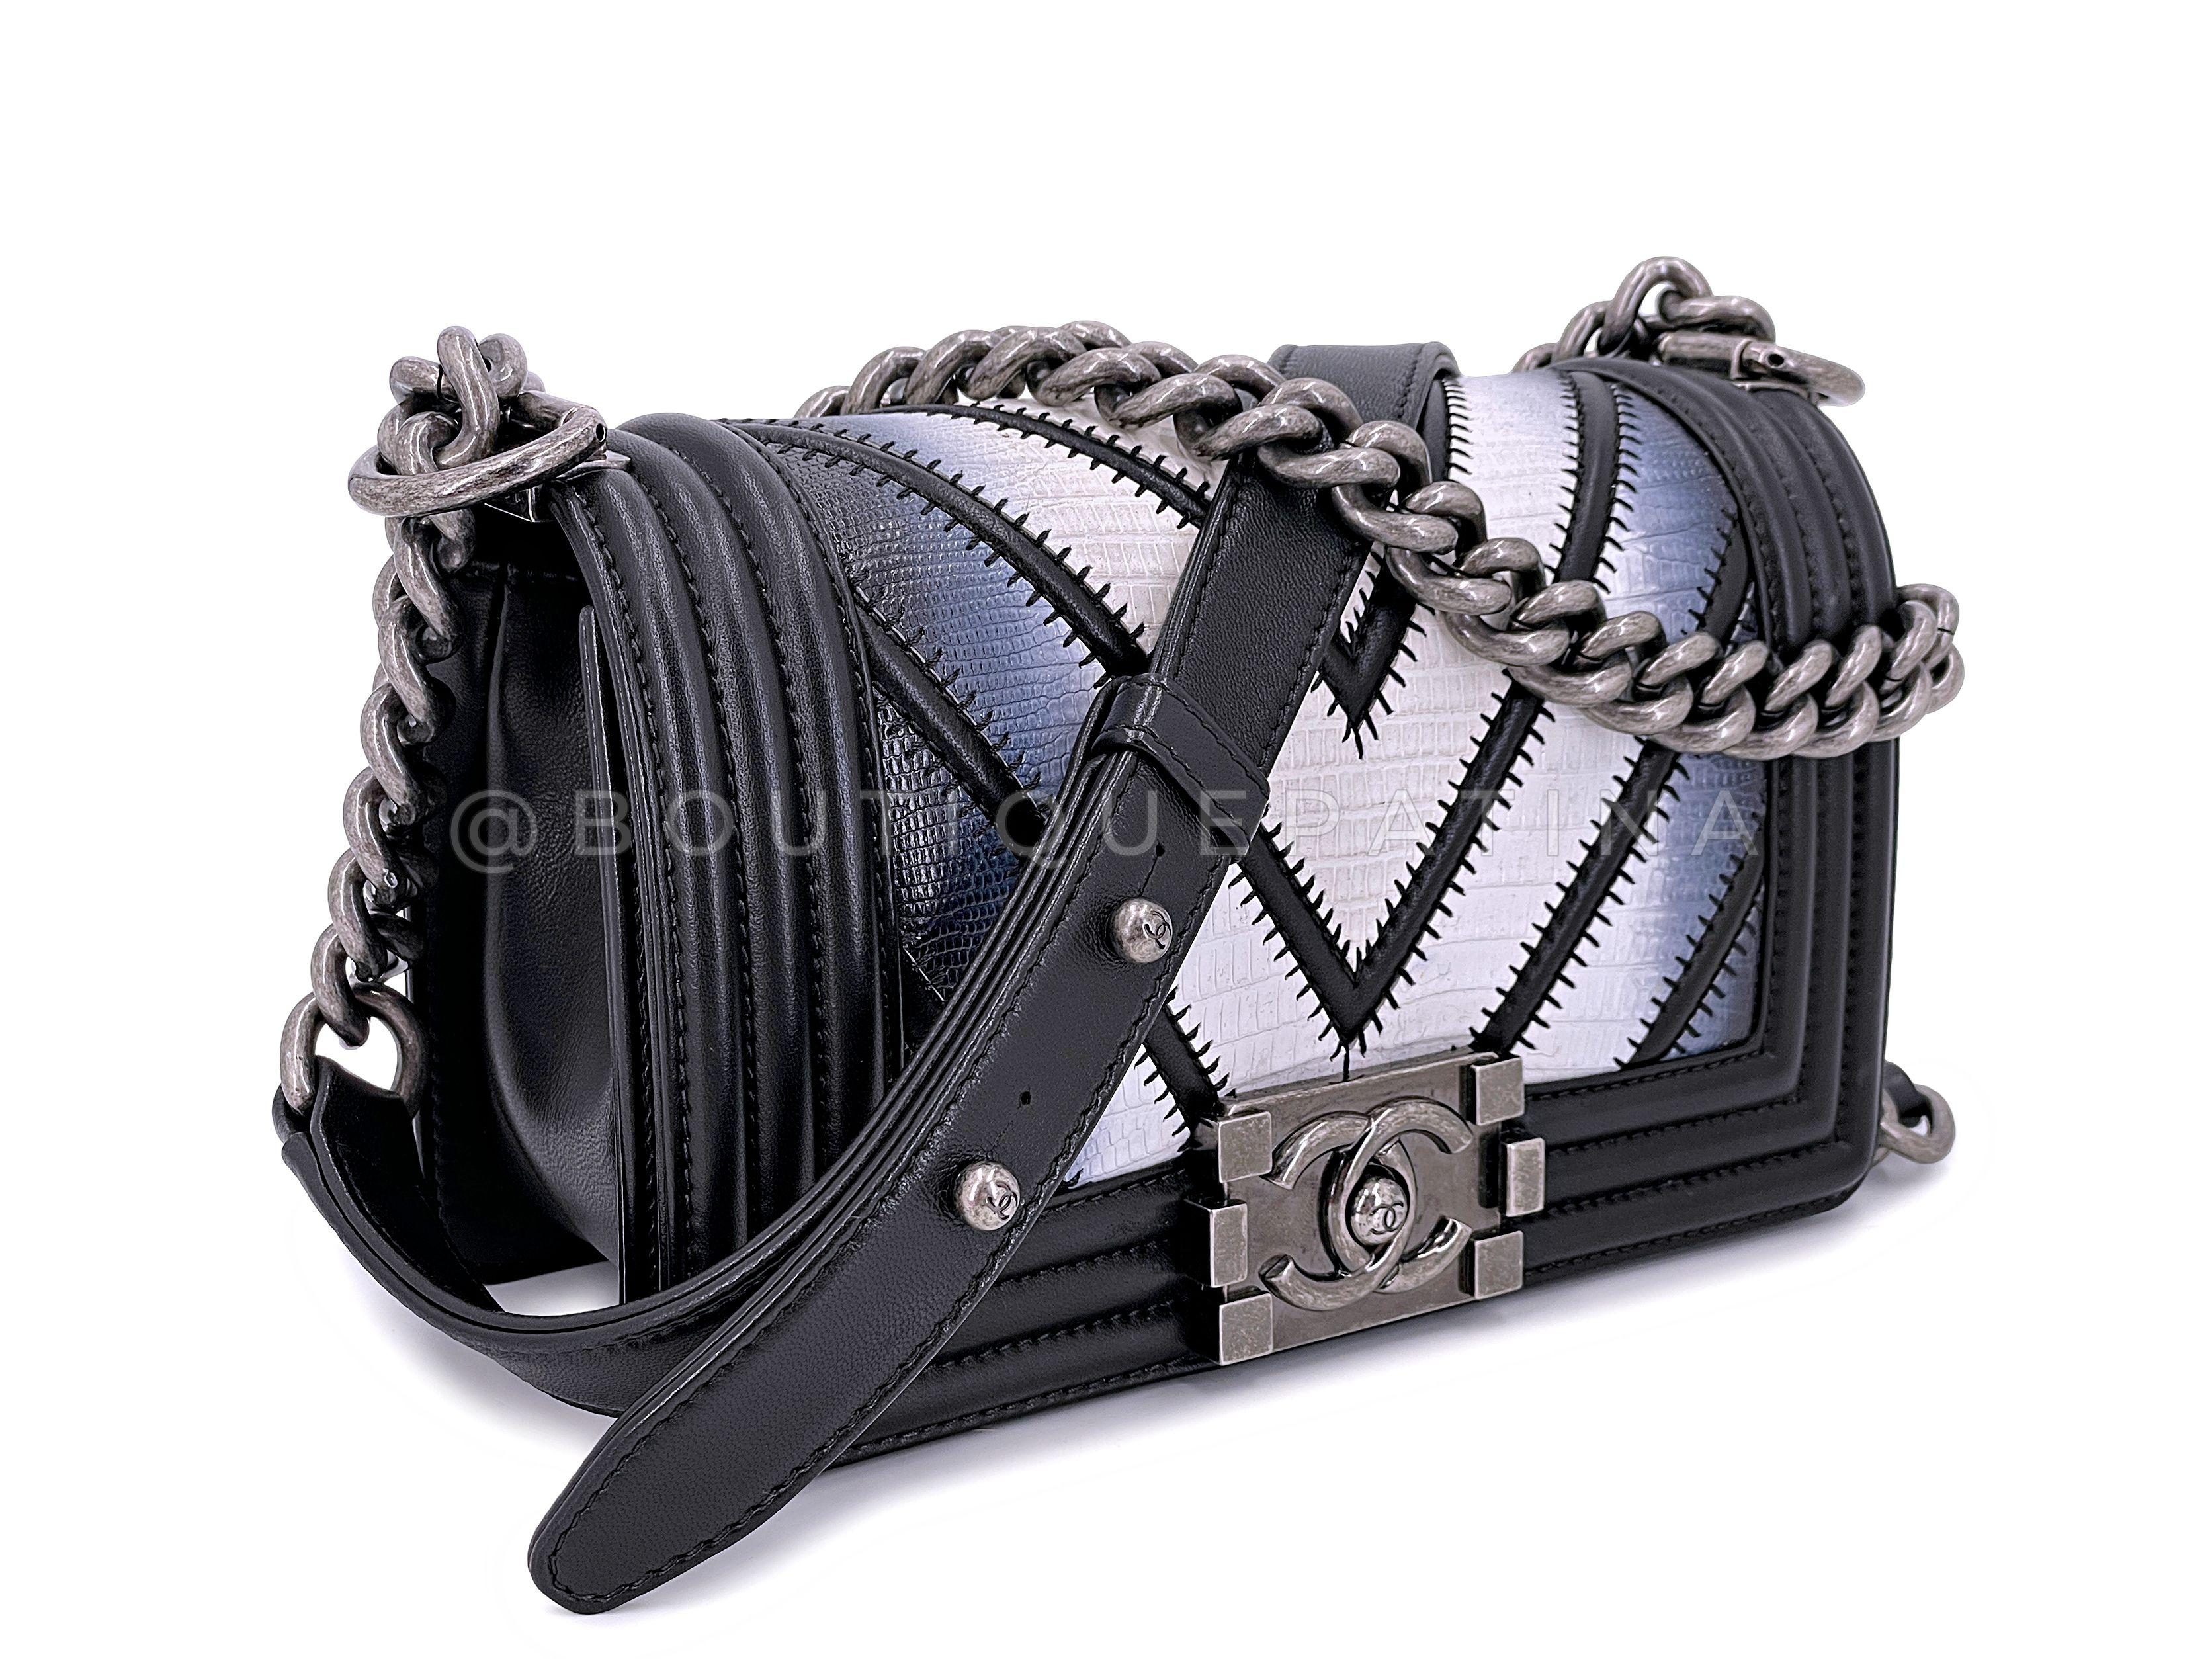 Store item: 67244
One of the most sought-after models within the house of Chanel is this Rare Chanel Black 2016 Airlines Chevron Lizard Boy Classic Flap Bag. Extremely rare and hard to find, this item was debuted as part of Lagerfeld's 